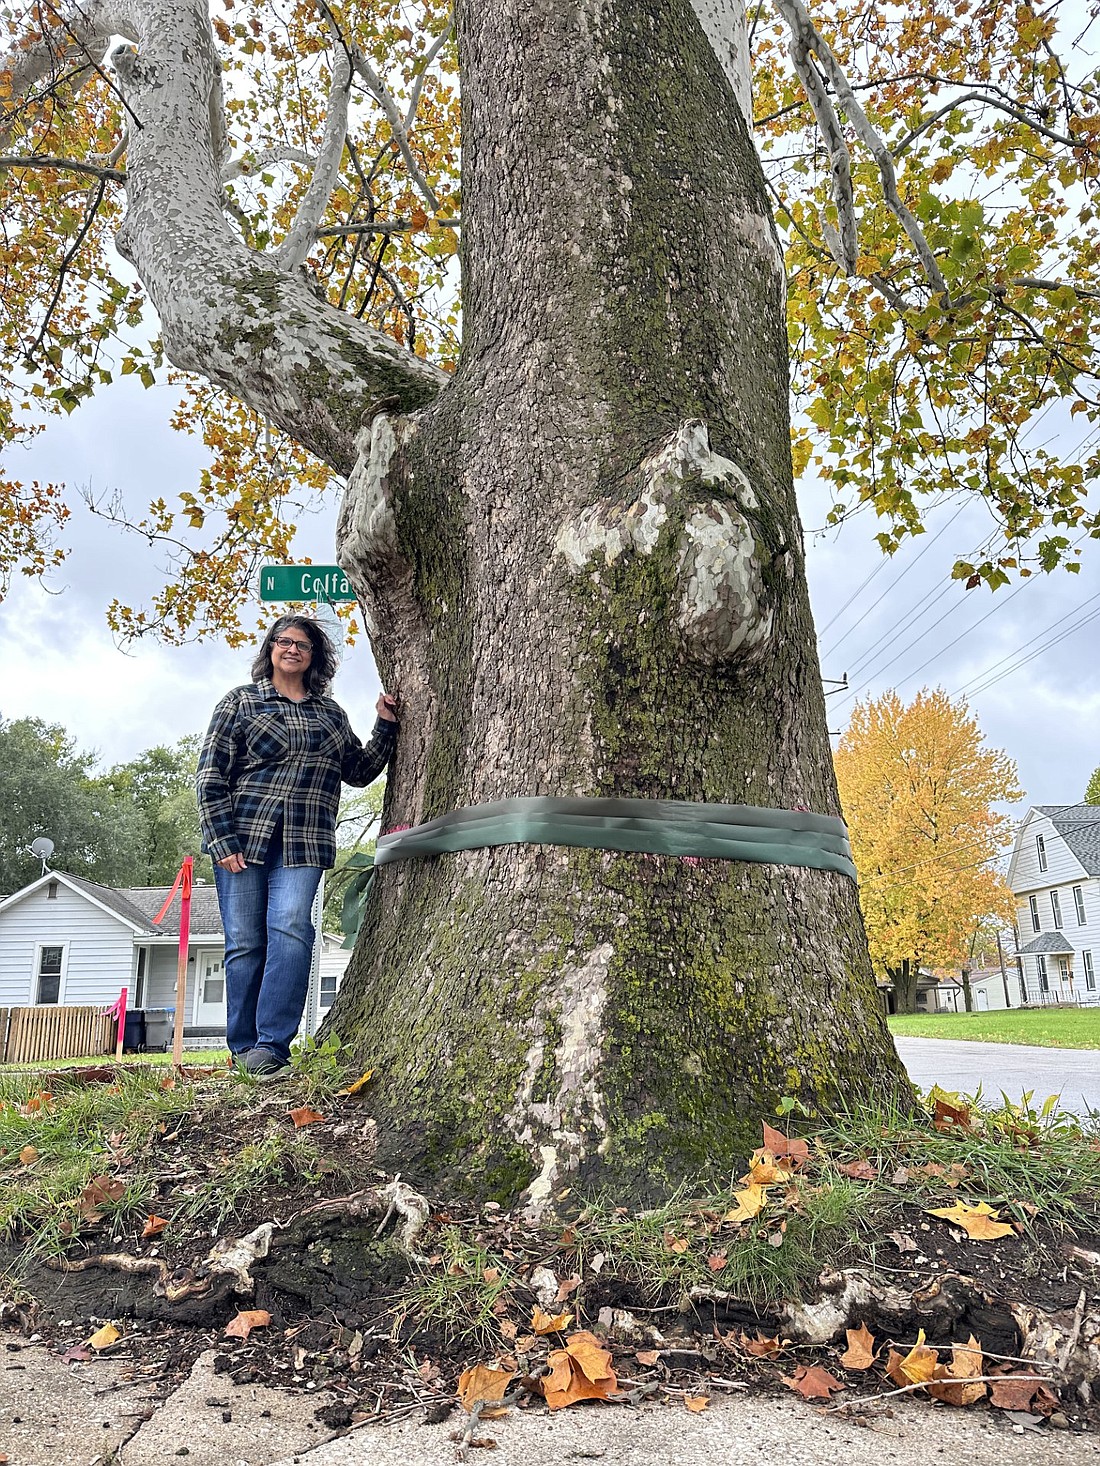 Gita Kamdar poses for a photo with the Sycamore tree in her front yard estimated to be at least 275 years old. Photo by David Slone, Times-Union